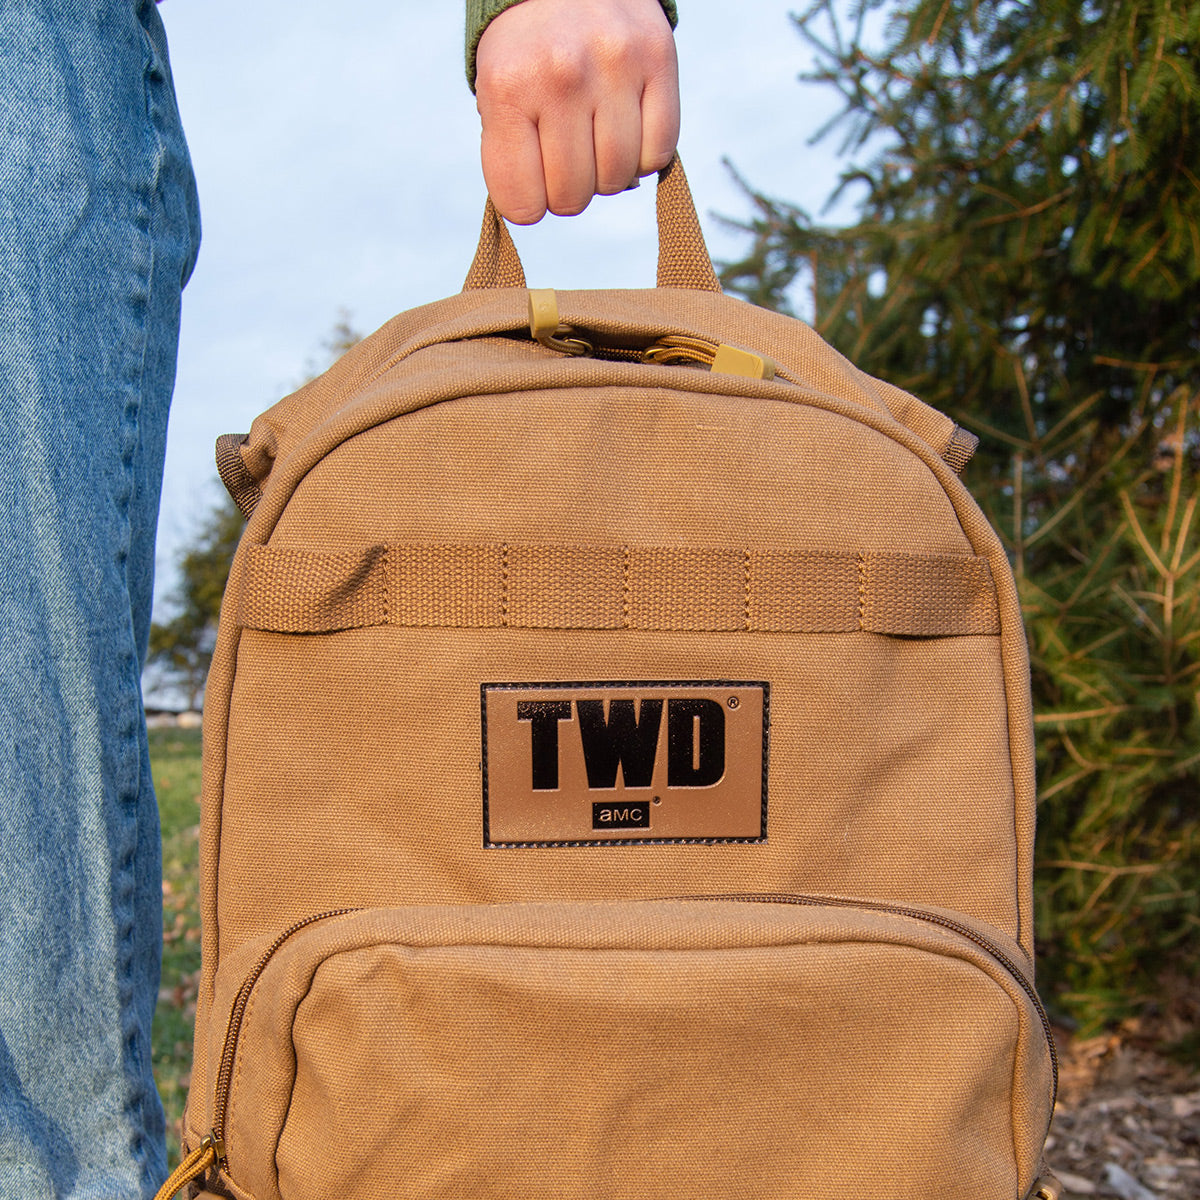 The Walking Dead Backpack - Inspired By Daryl Dixon